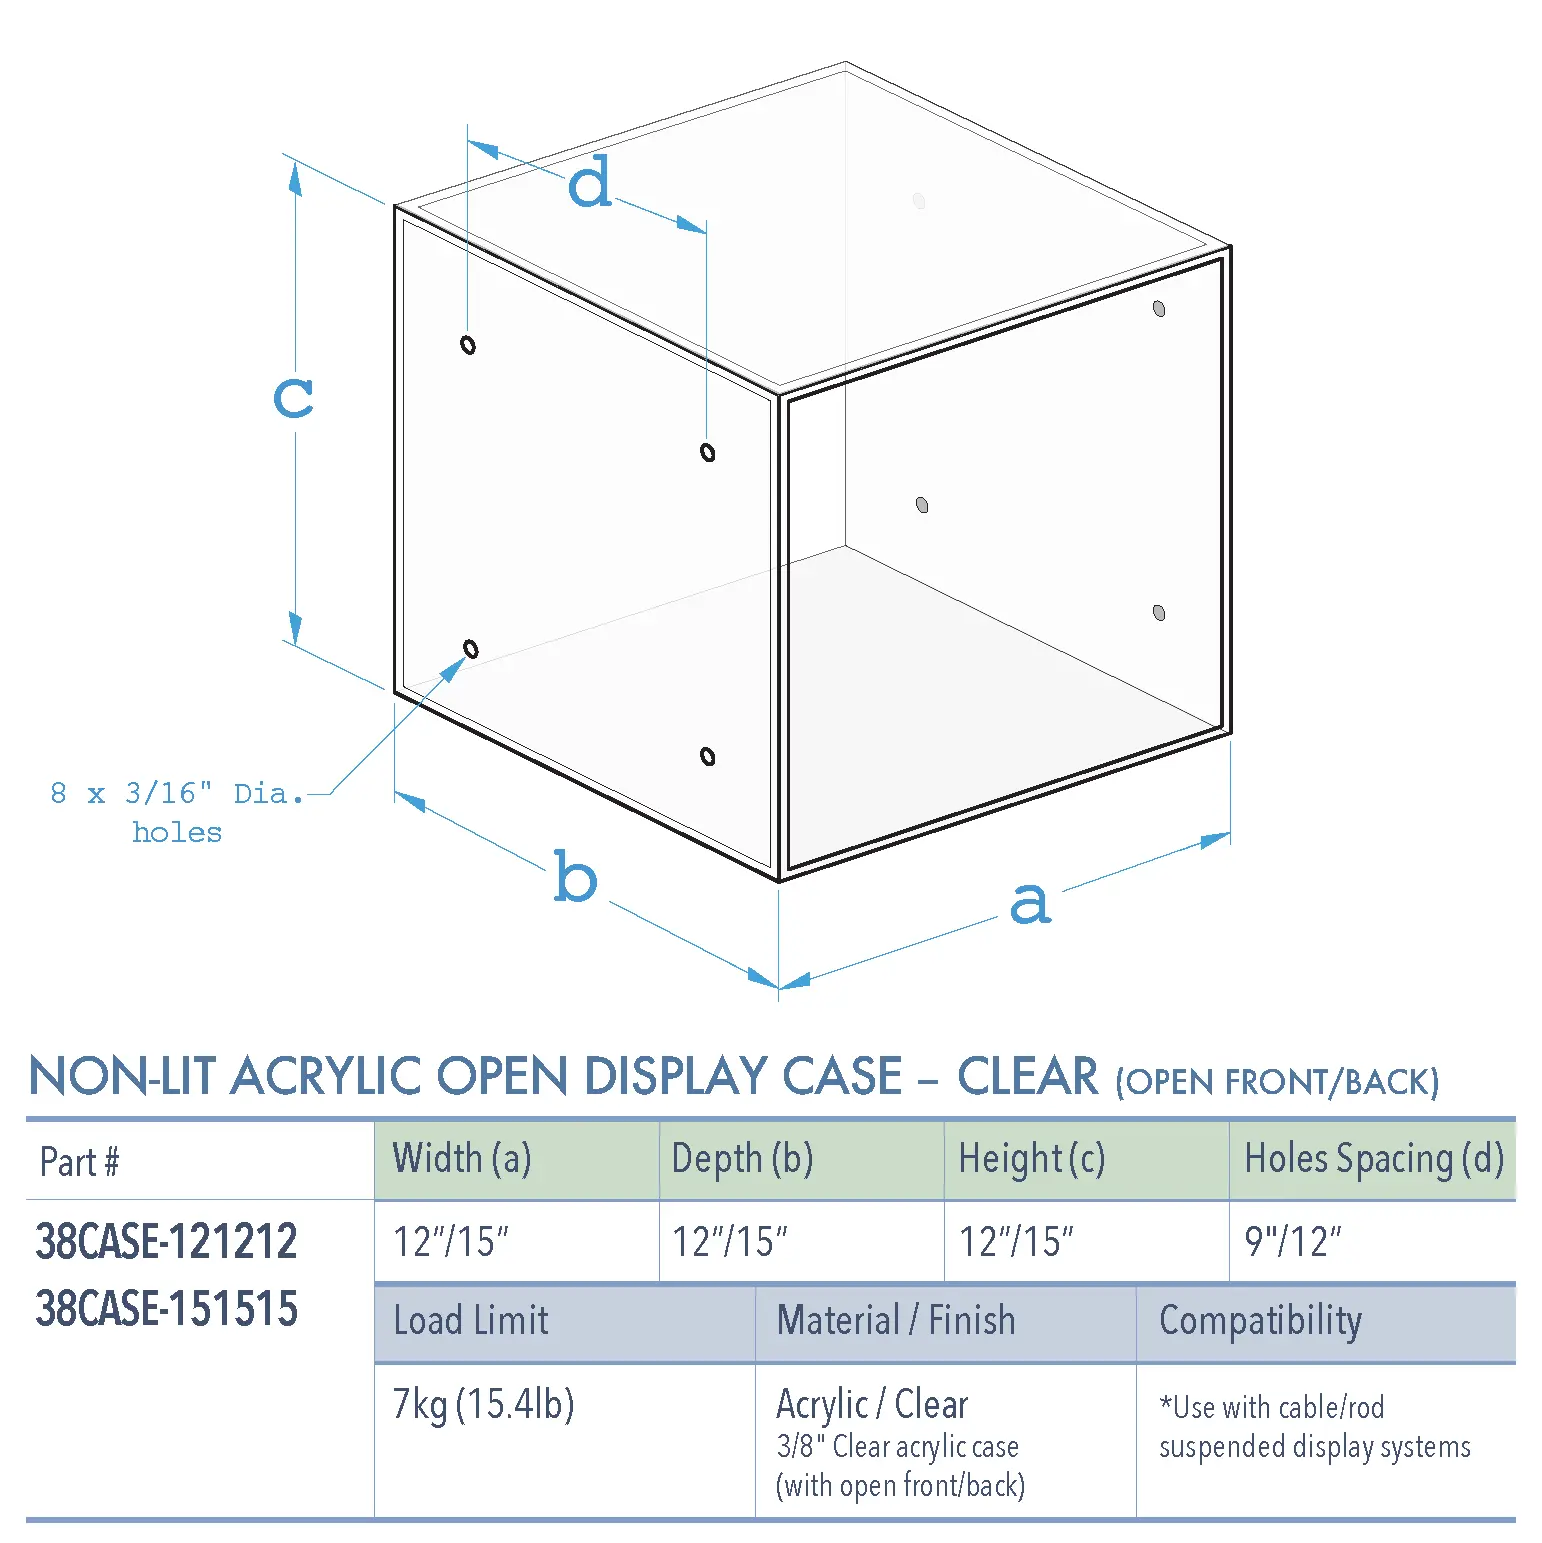 Specifications for 38CASE-CLEAR-OPEN